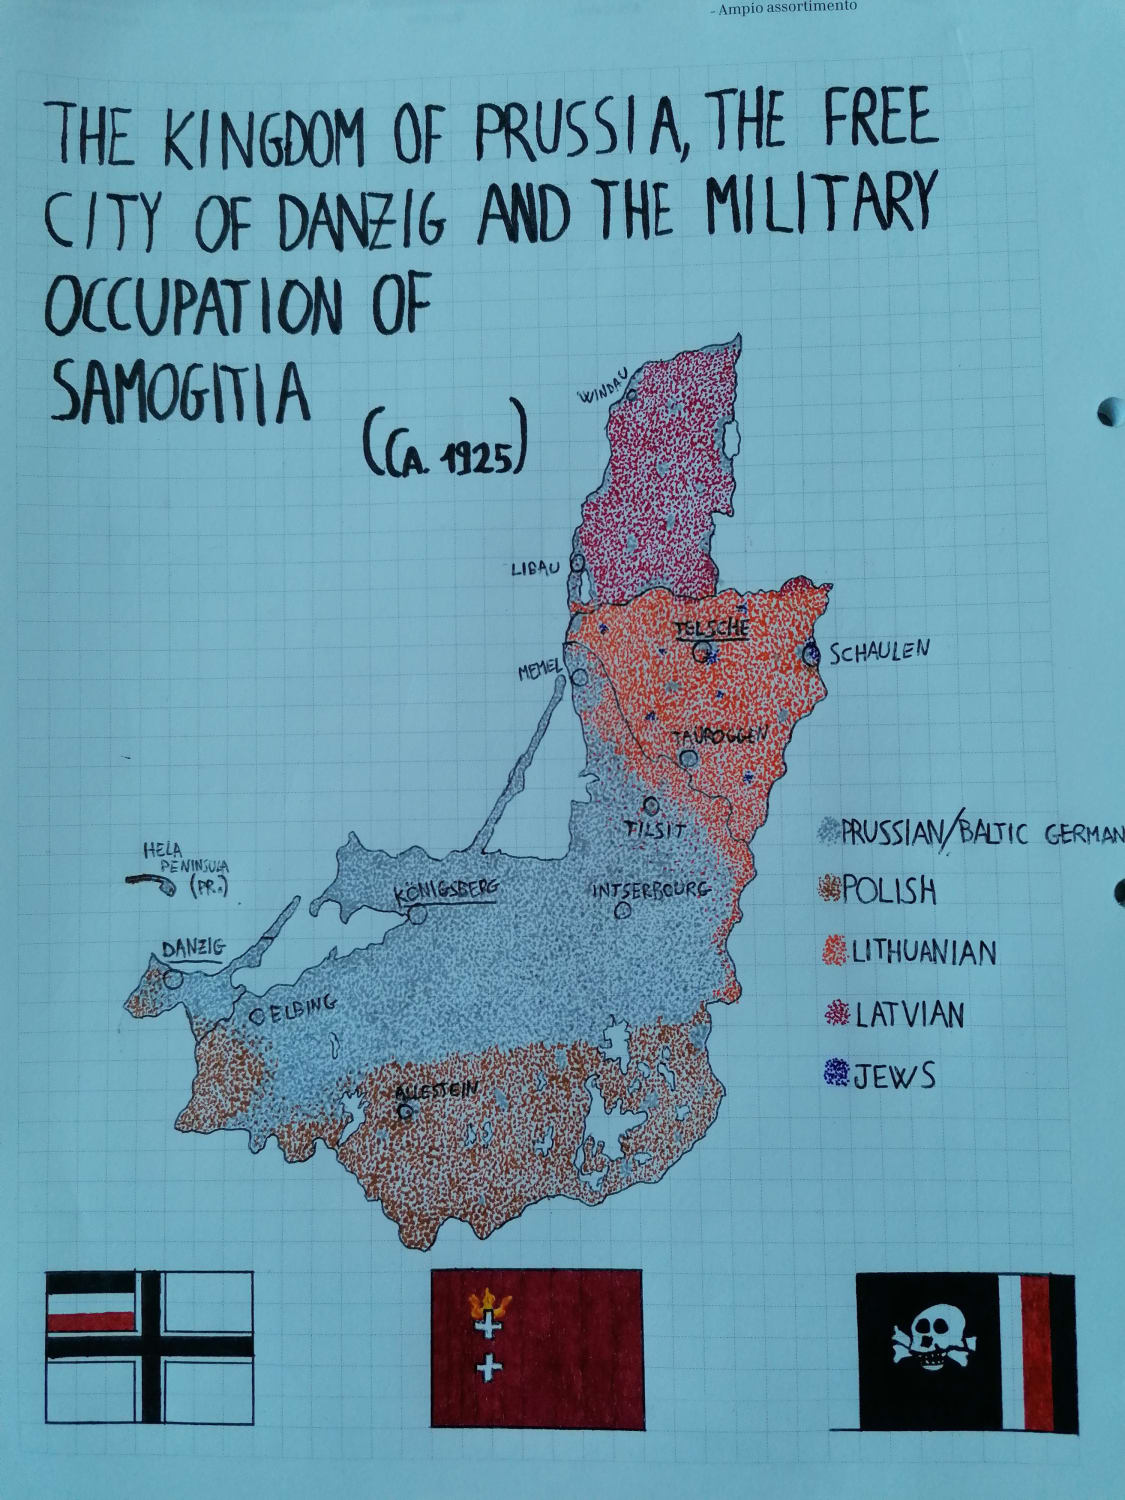 Finally, after 2 month to have done nothing, here is my ethnic map of my ucronia on the kingdom of prussia, the free city of Danzig and the military occupation of samogitia (lore in the first comment)